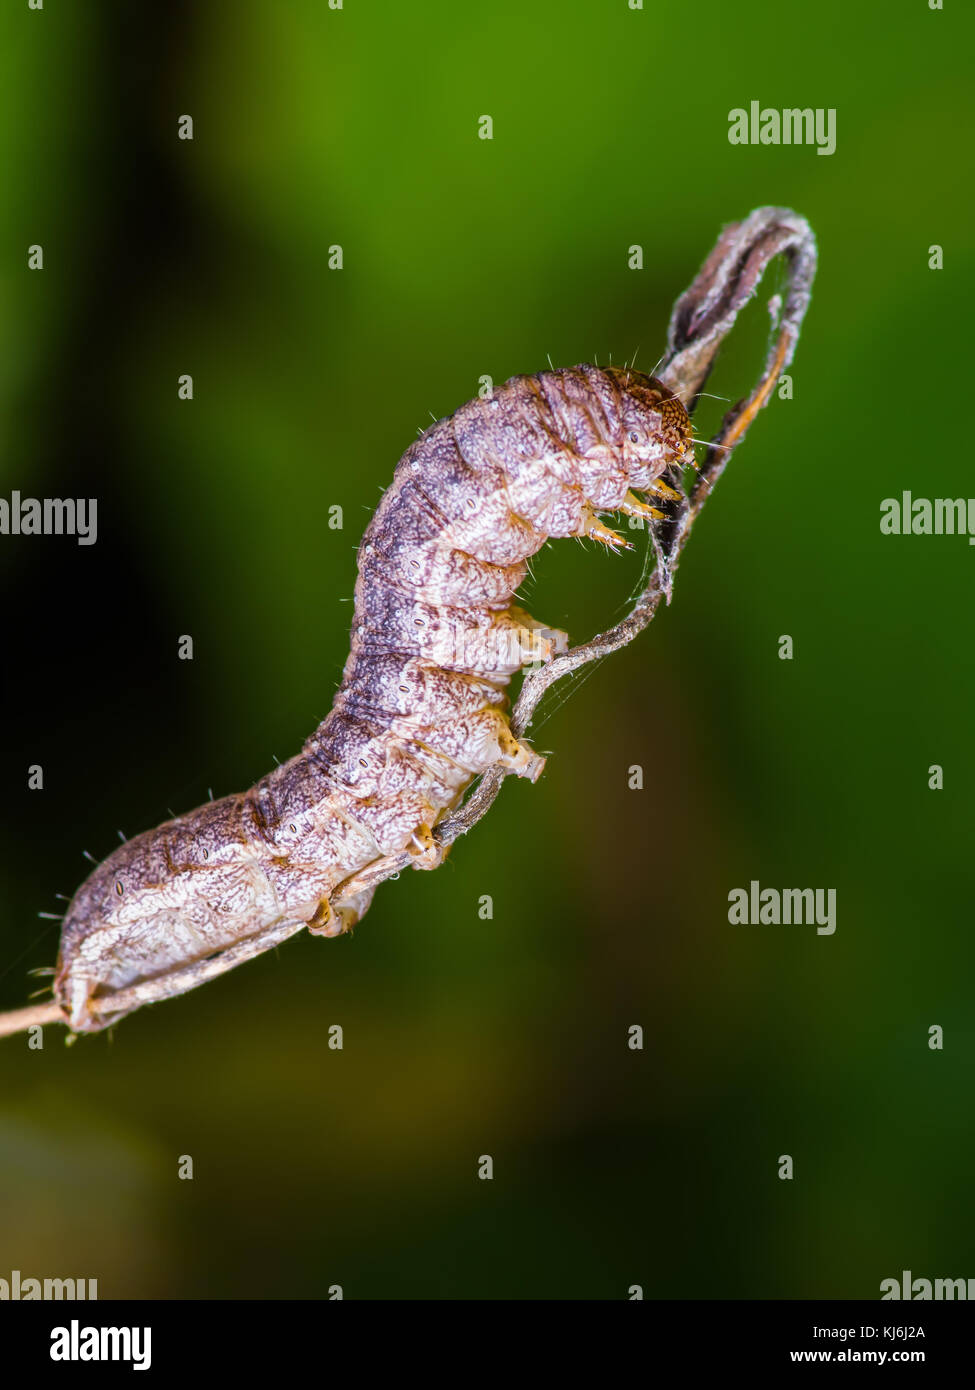 Exotic Caterpillar Insect on Twig Macro Stock Photo